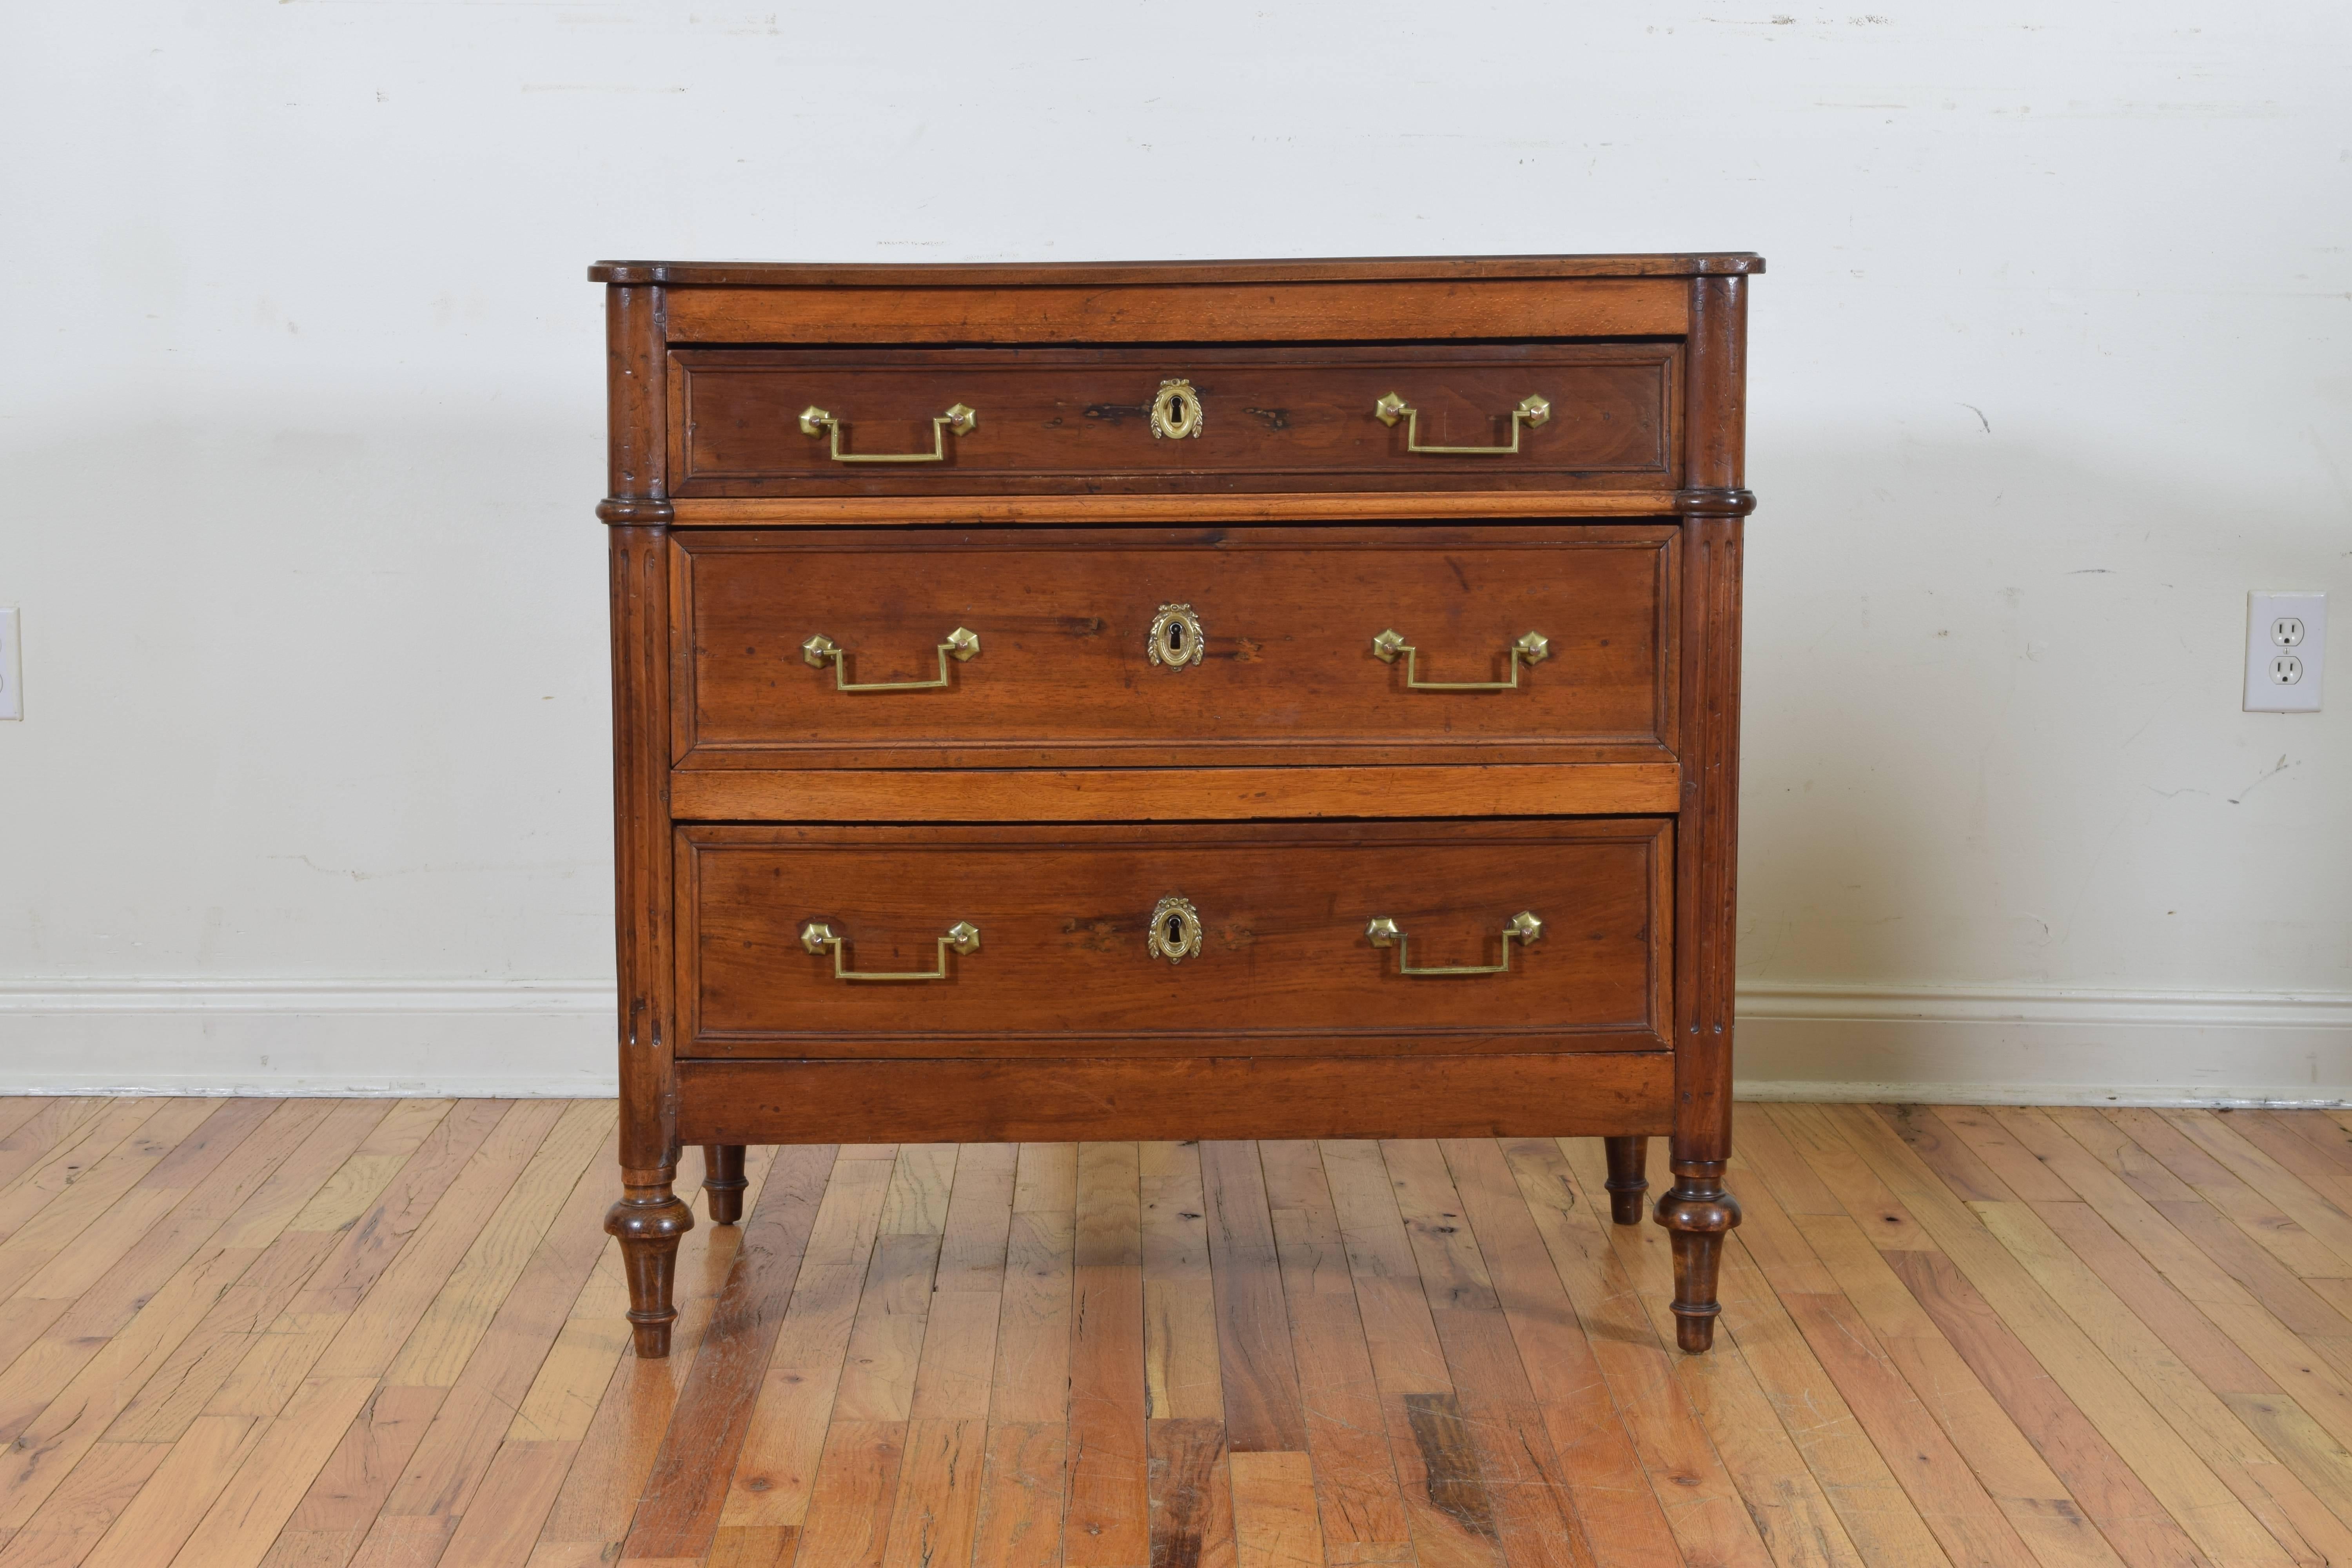 The rectangular top with rounded corners atop a conforming case with fluted columnar corners, the three drawers retaining antique handles and escutcheons, raised on shaped and tapering feet.